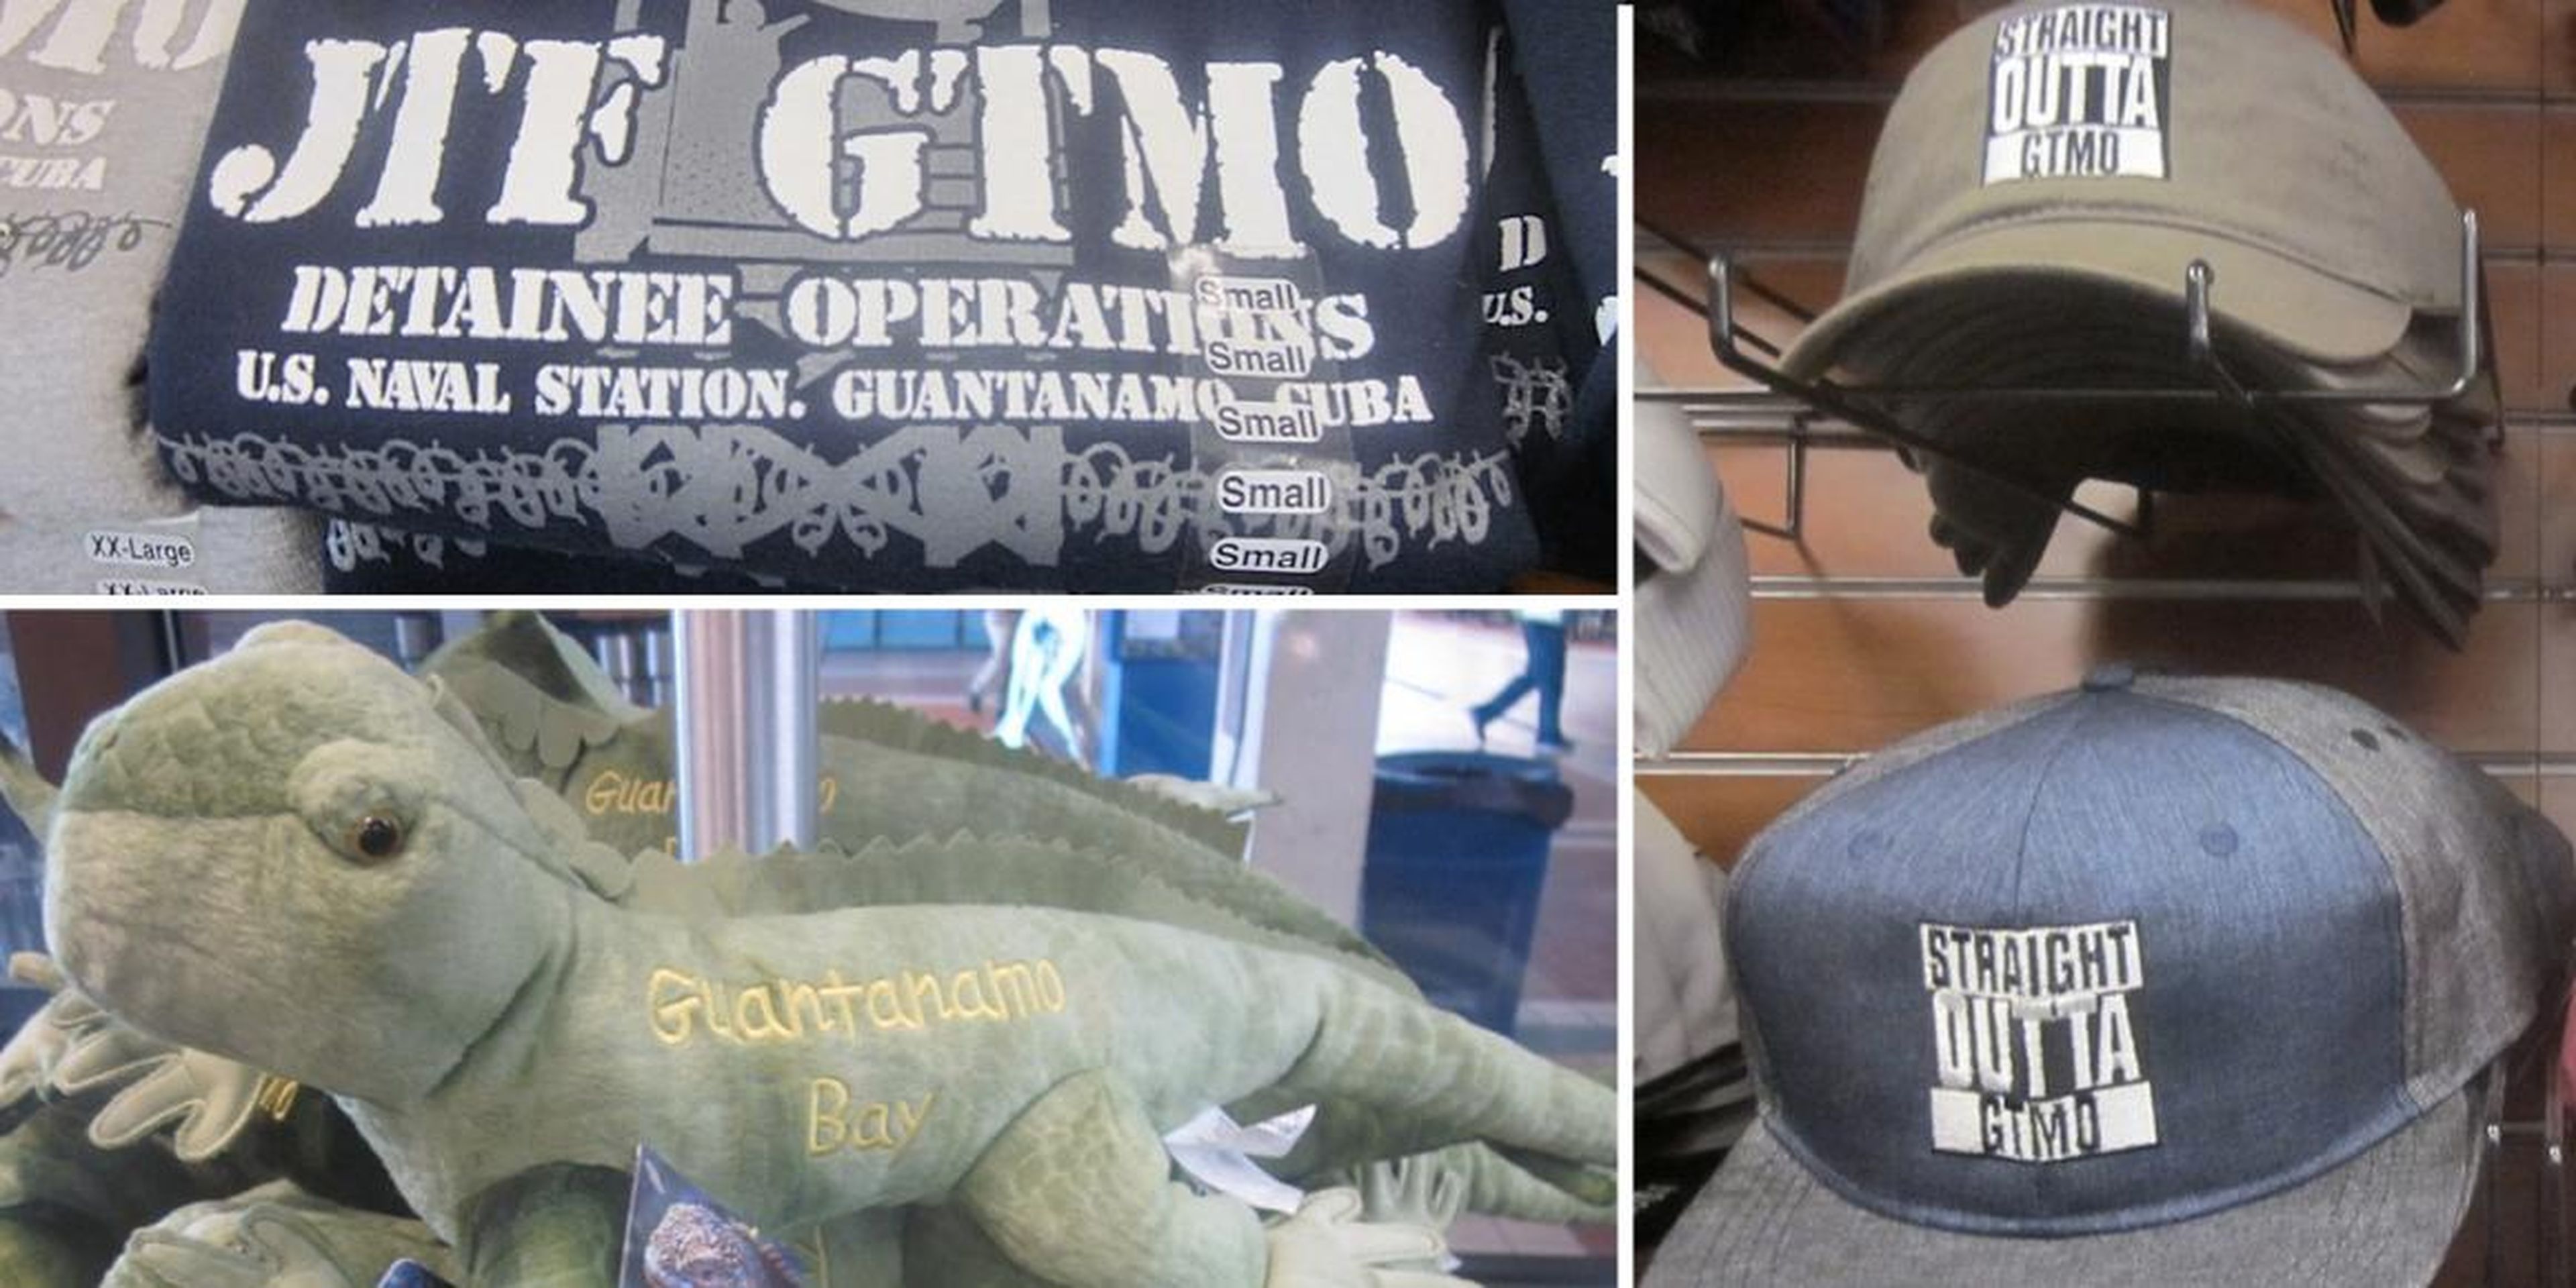 A composite image showing items for sale in a US Navy gift shop in Guantanamo Bay, Cuba.